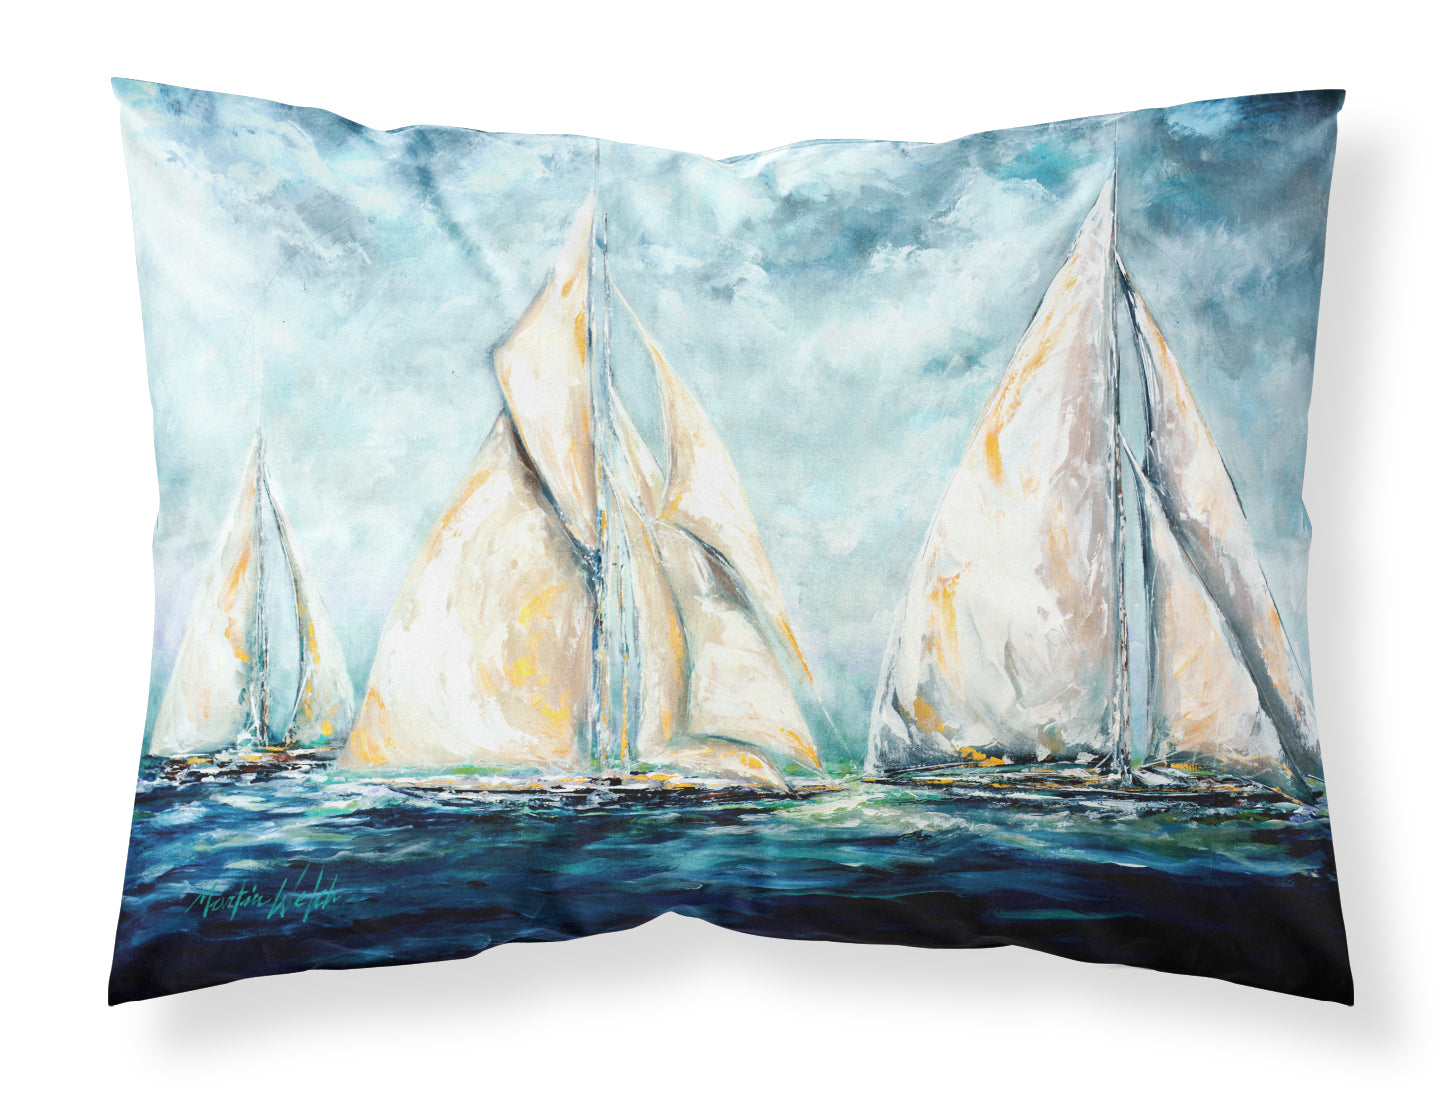 Buy this The Last Mile Sail boats Fabric Standard Pillowcase